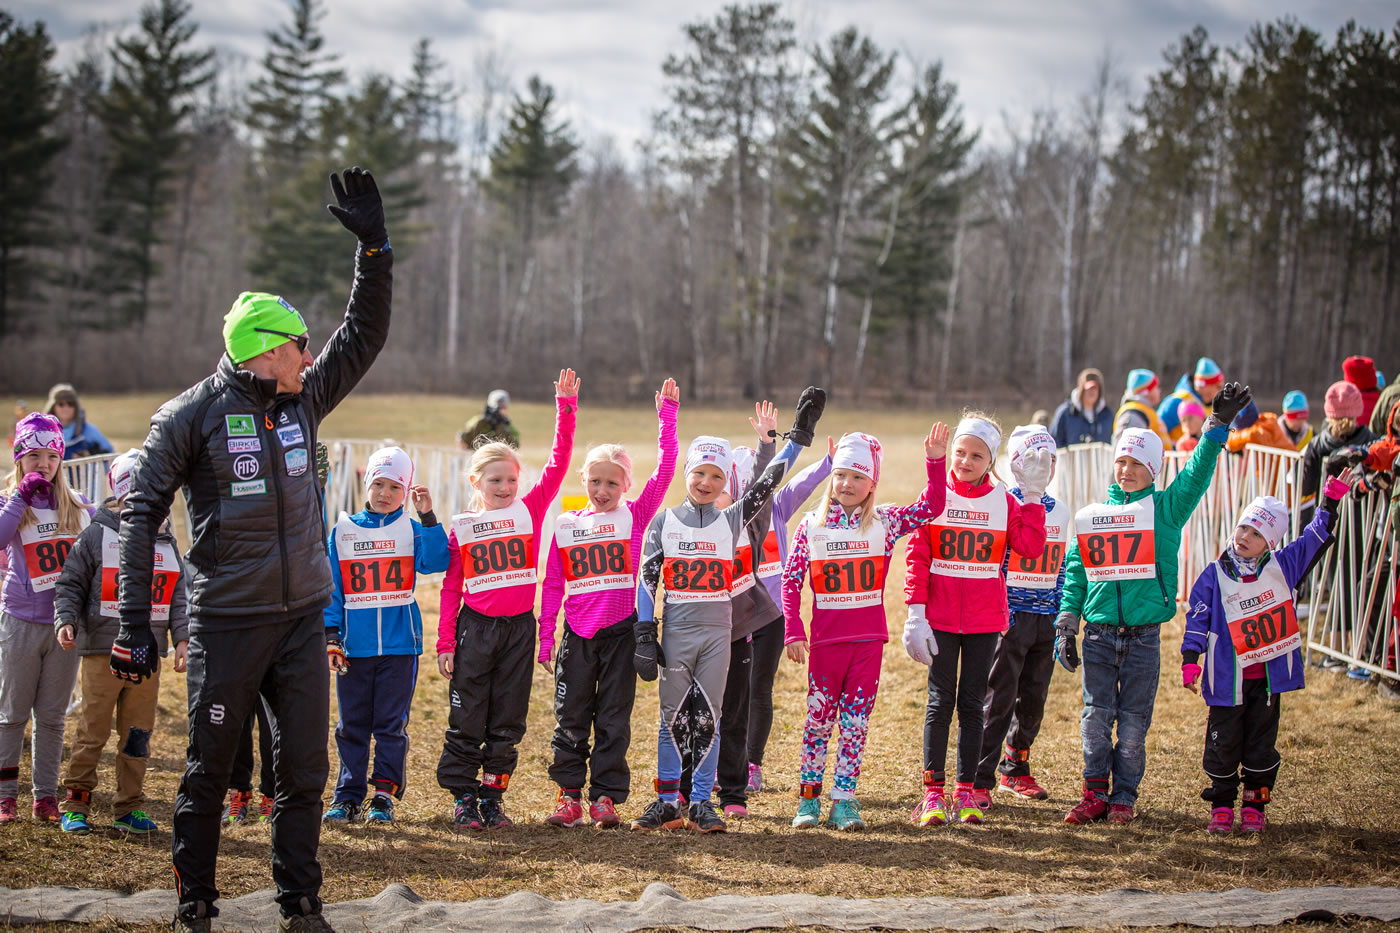 Brian Gregg of Team Gregg leading warm-ups before the Junior and BarneBirkie running races. Not much snow but lots of enthusiastic kids! [Photo] Courtesy of ©American Birkebeiner Ski Foundation. [Photo] Courtesy of ©American Birkebeiner Ski Foundation